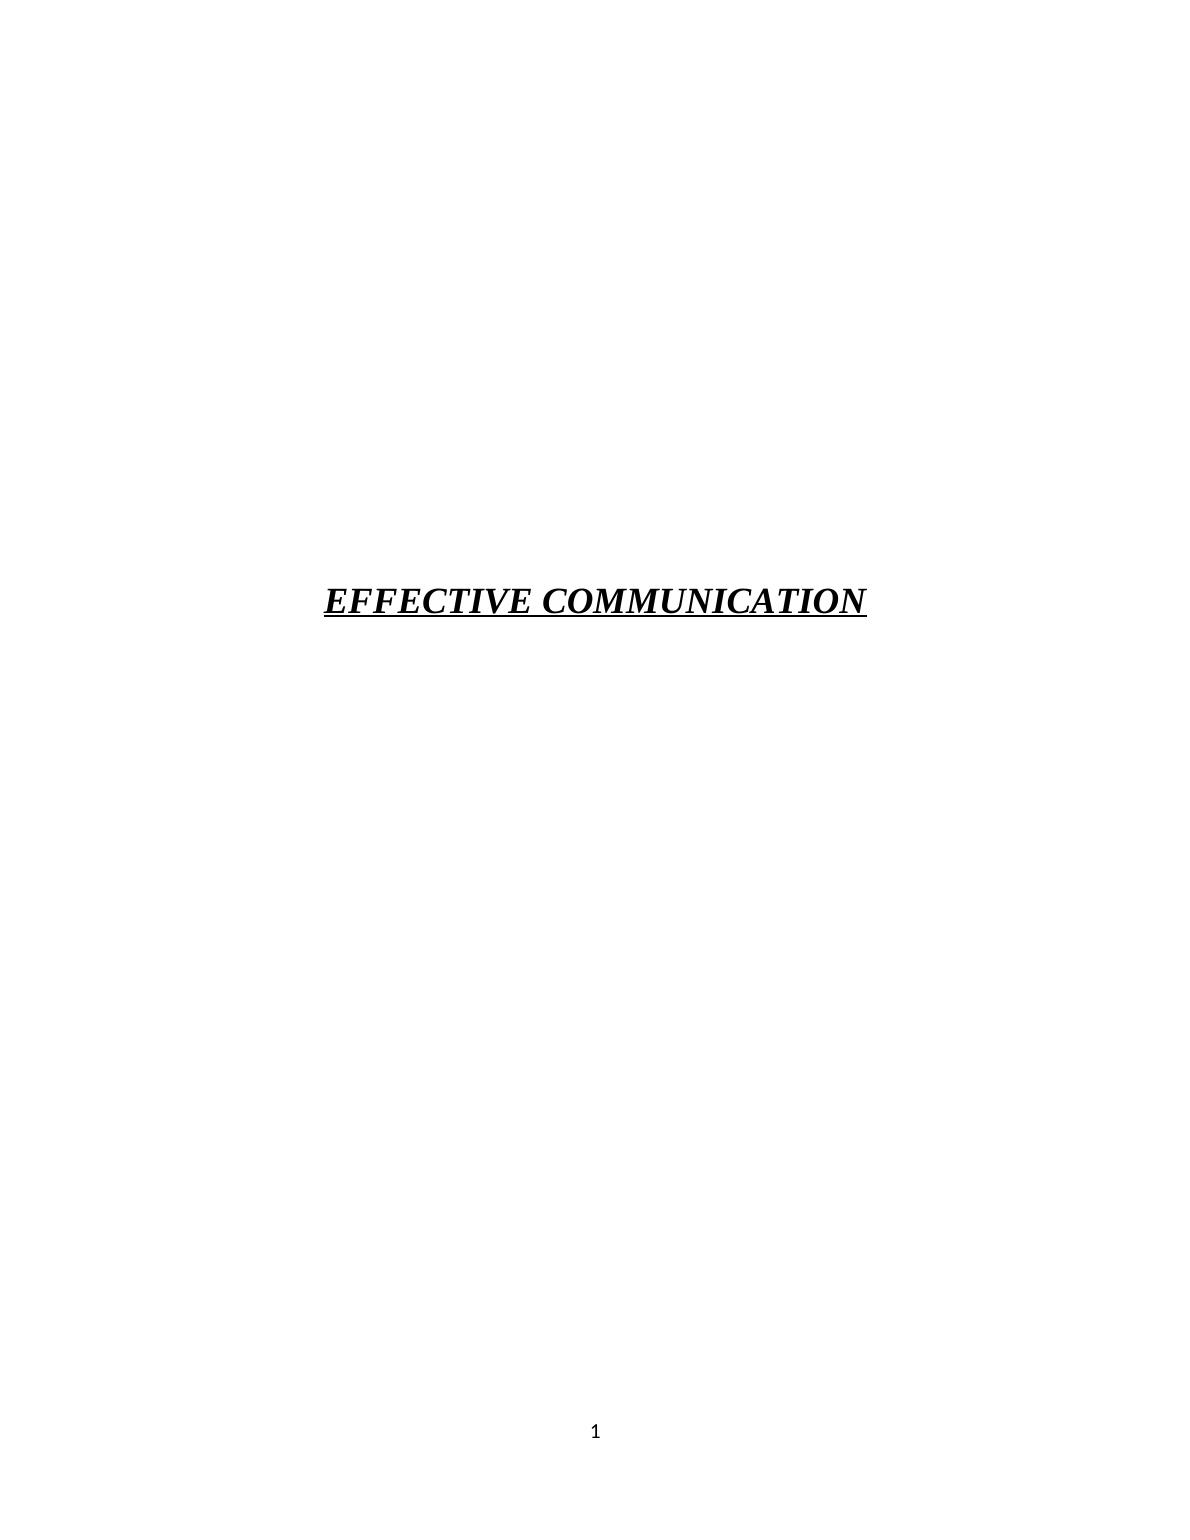 Report on Effective Communication Assignment_1